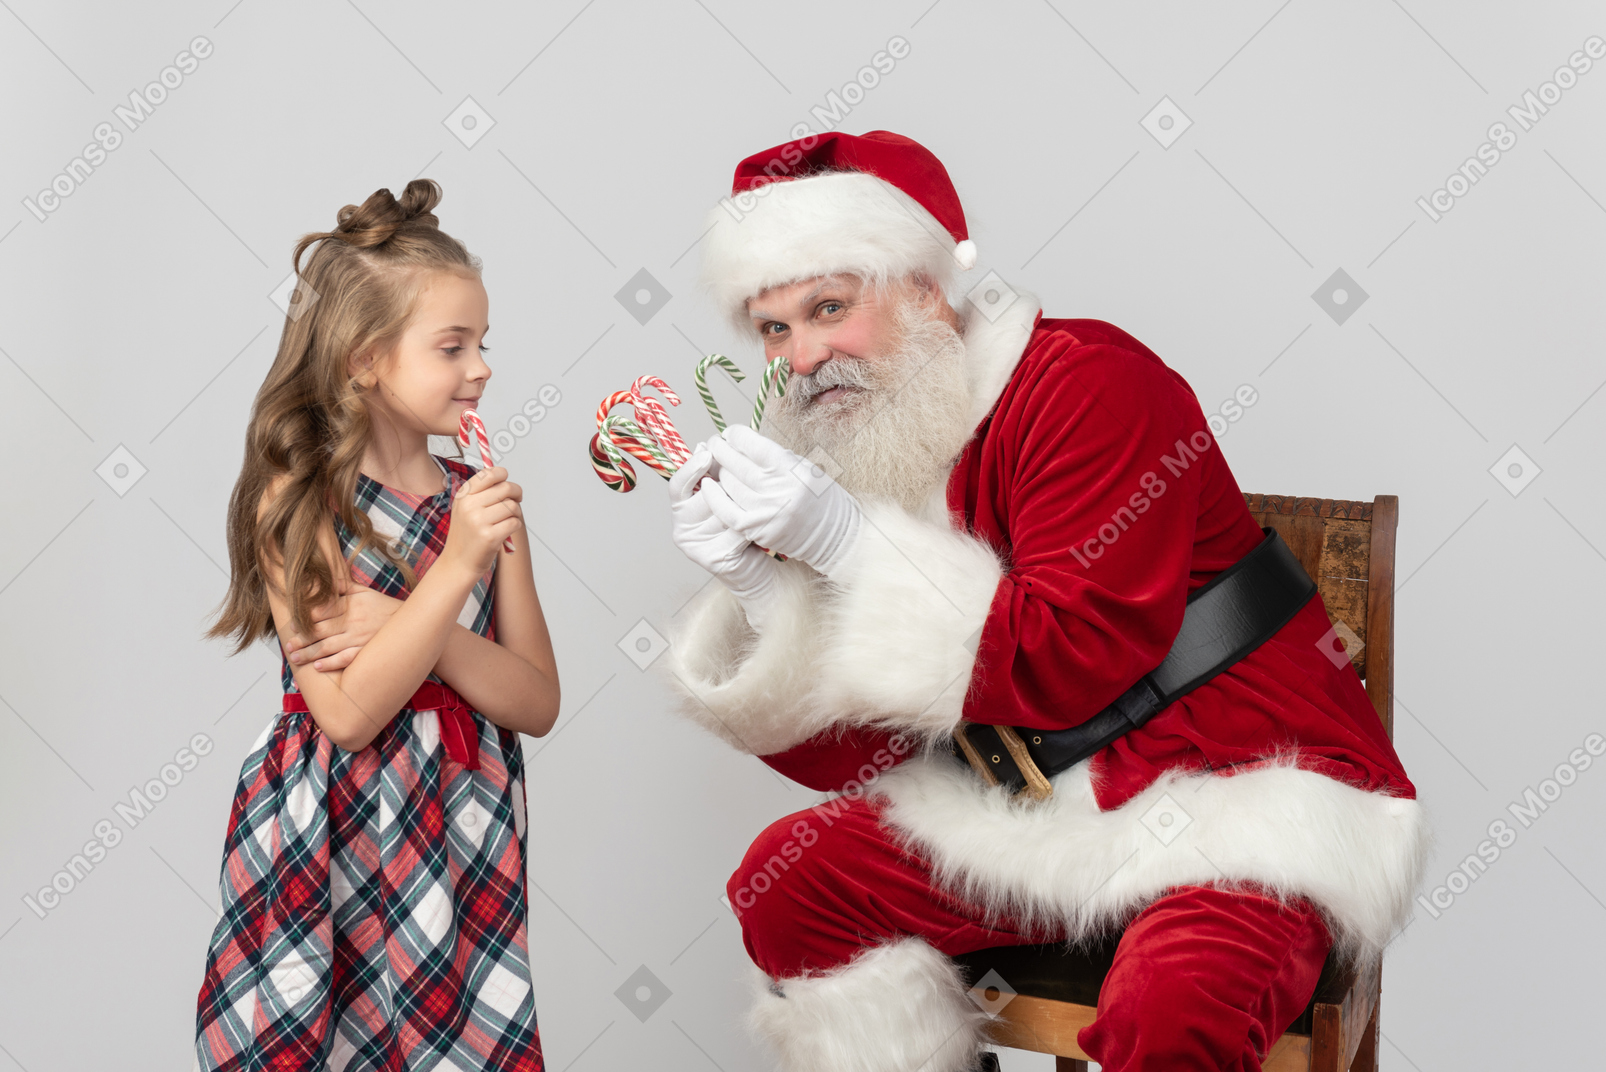 Kid girl picked one candy cane from which santa's holding